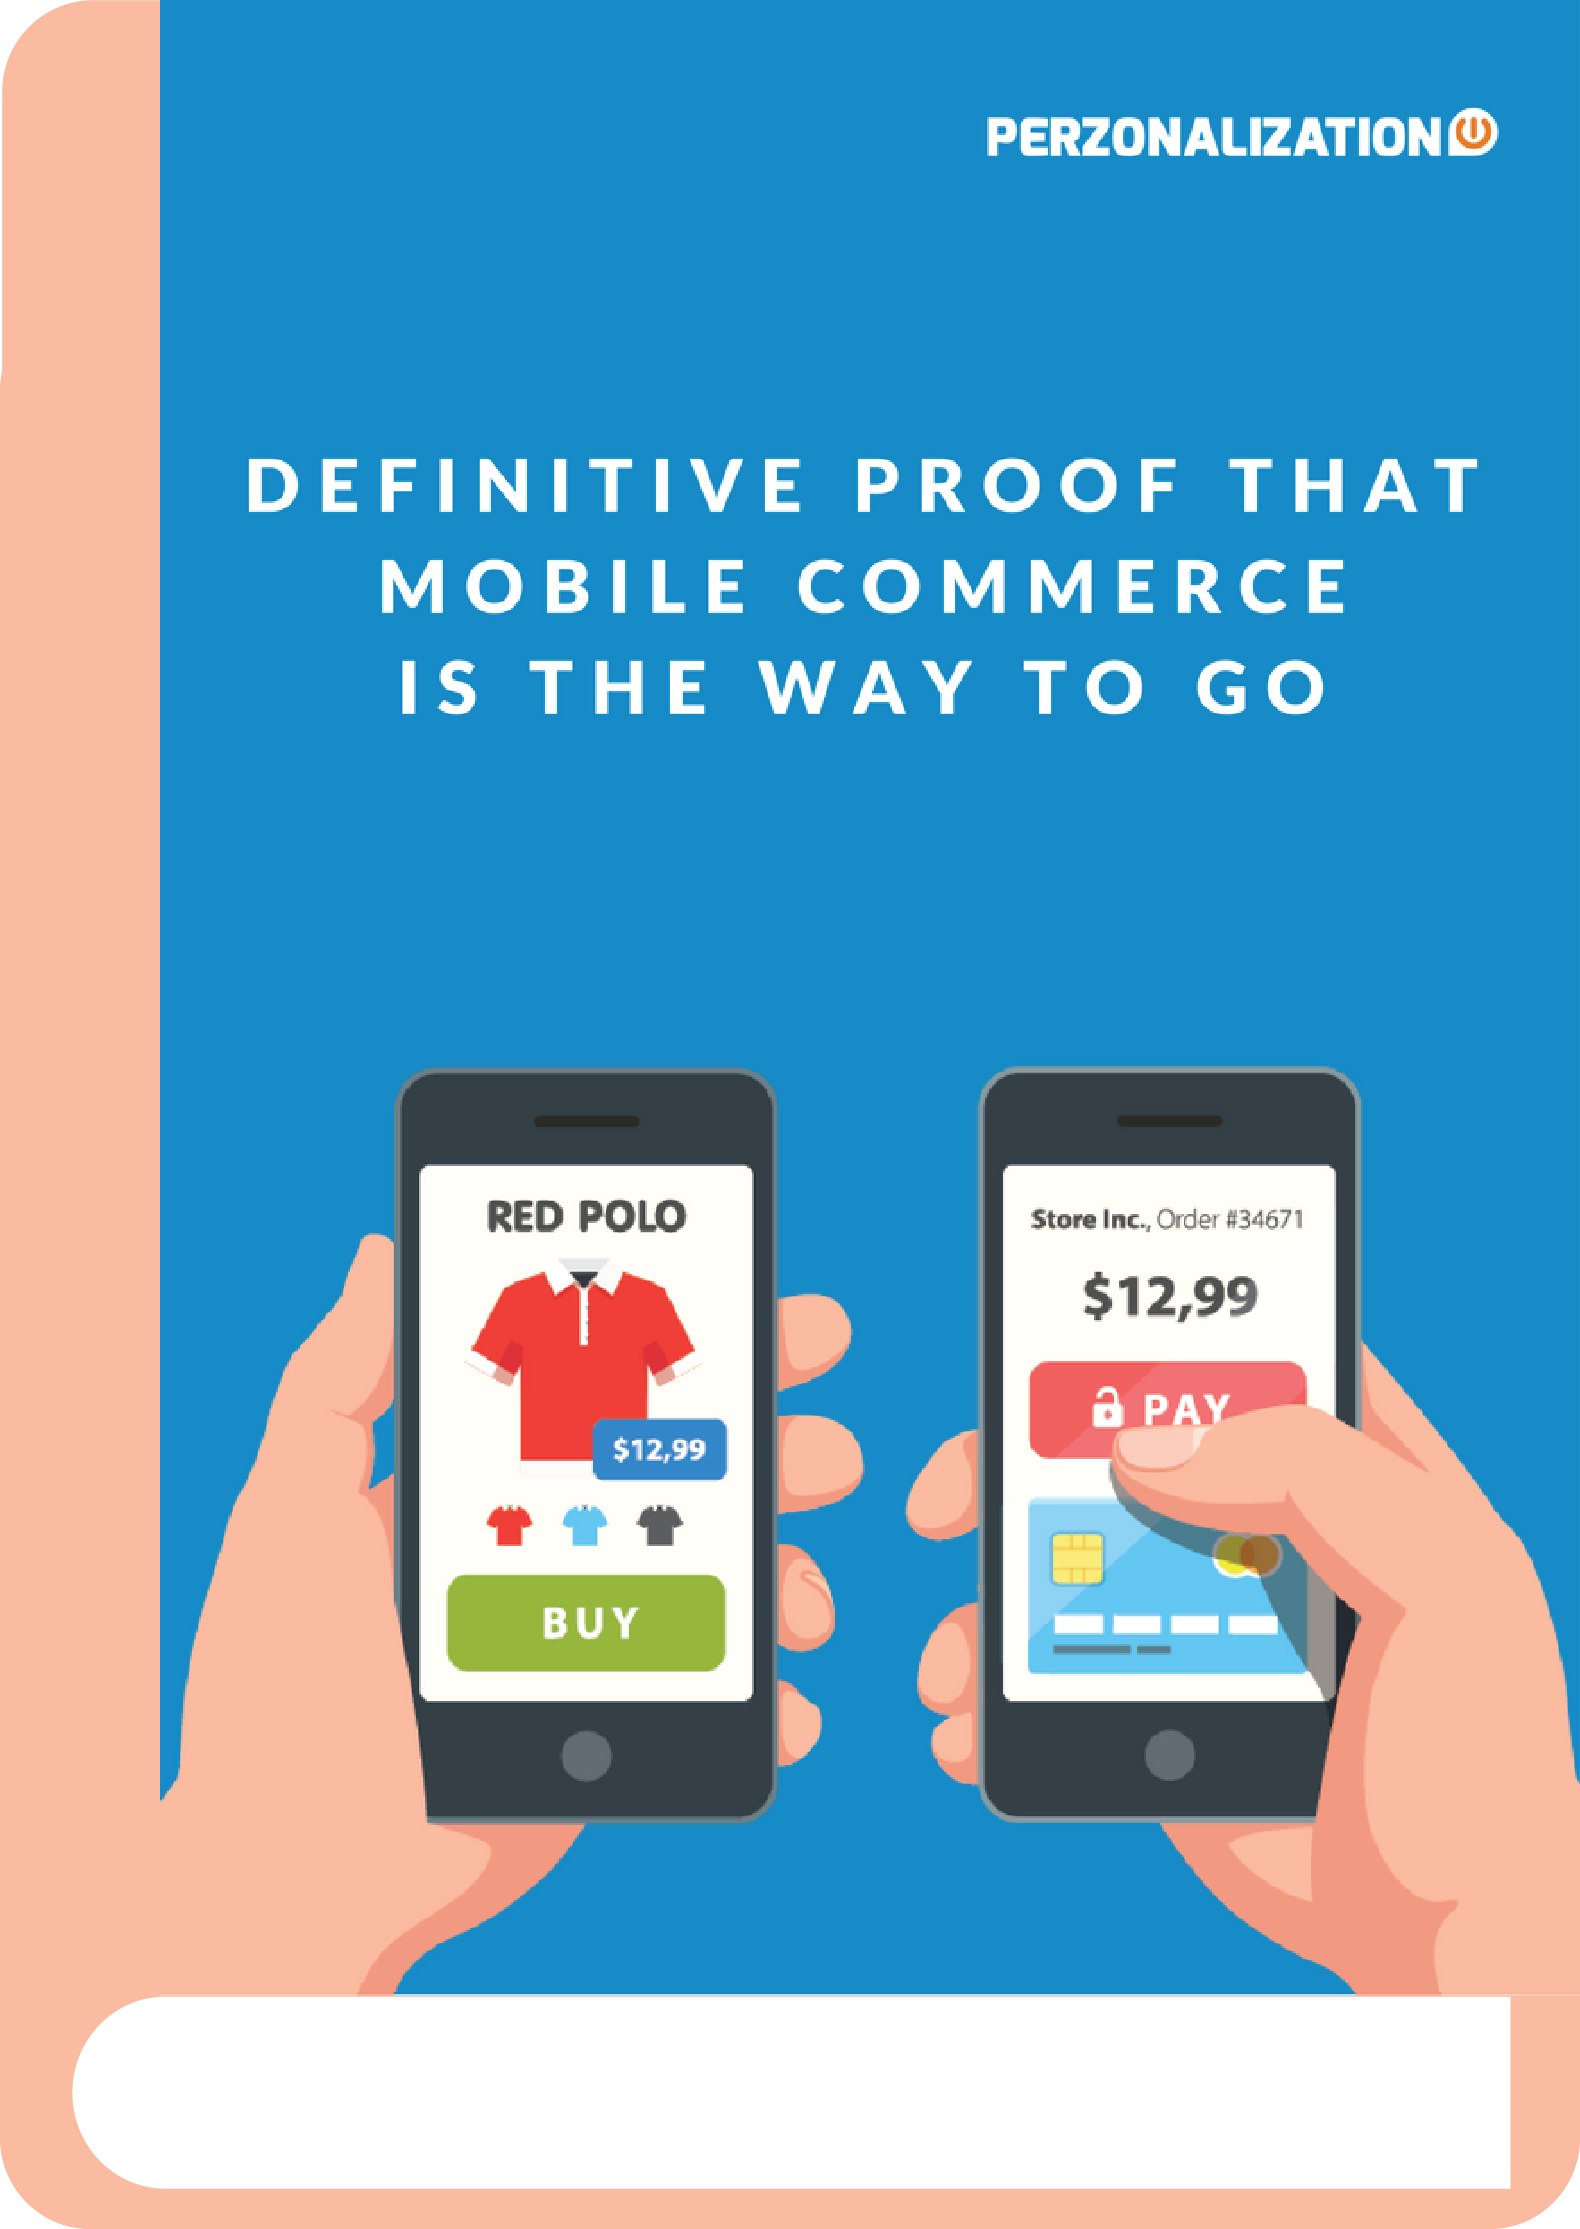 Mcommerce or Mobile commerce is the purchase and sale of products and services over handheld wireless devices such as mobile phone or cellular phone.